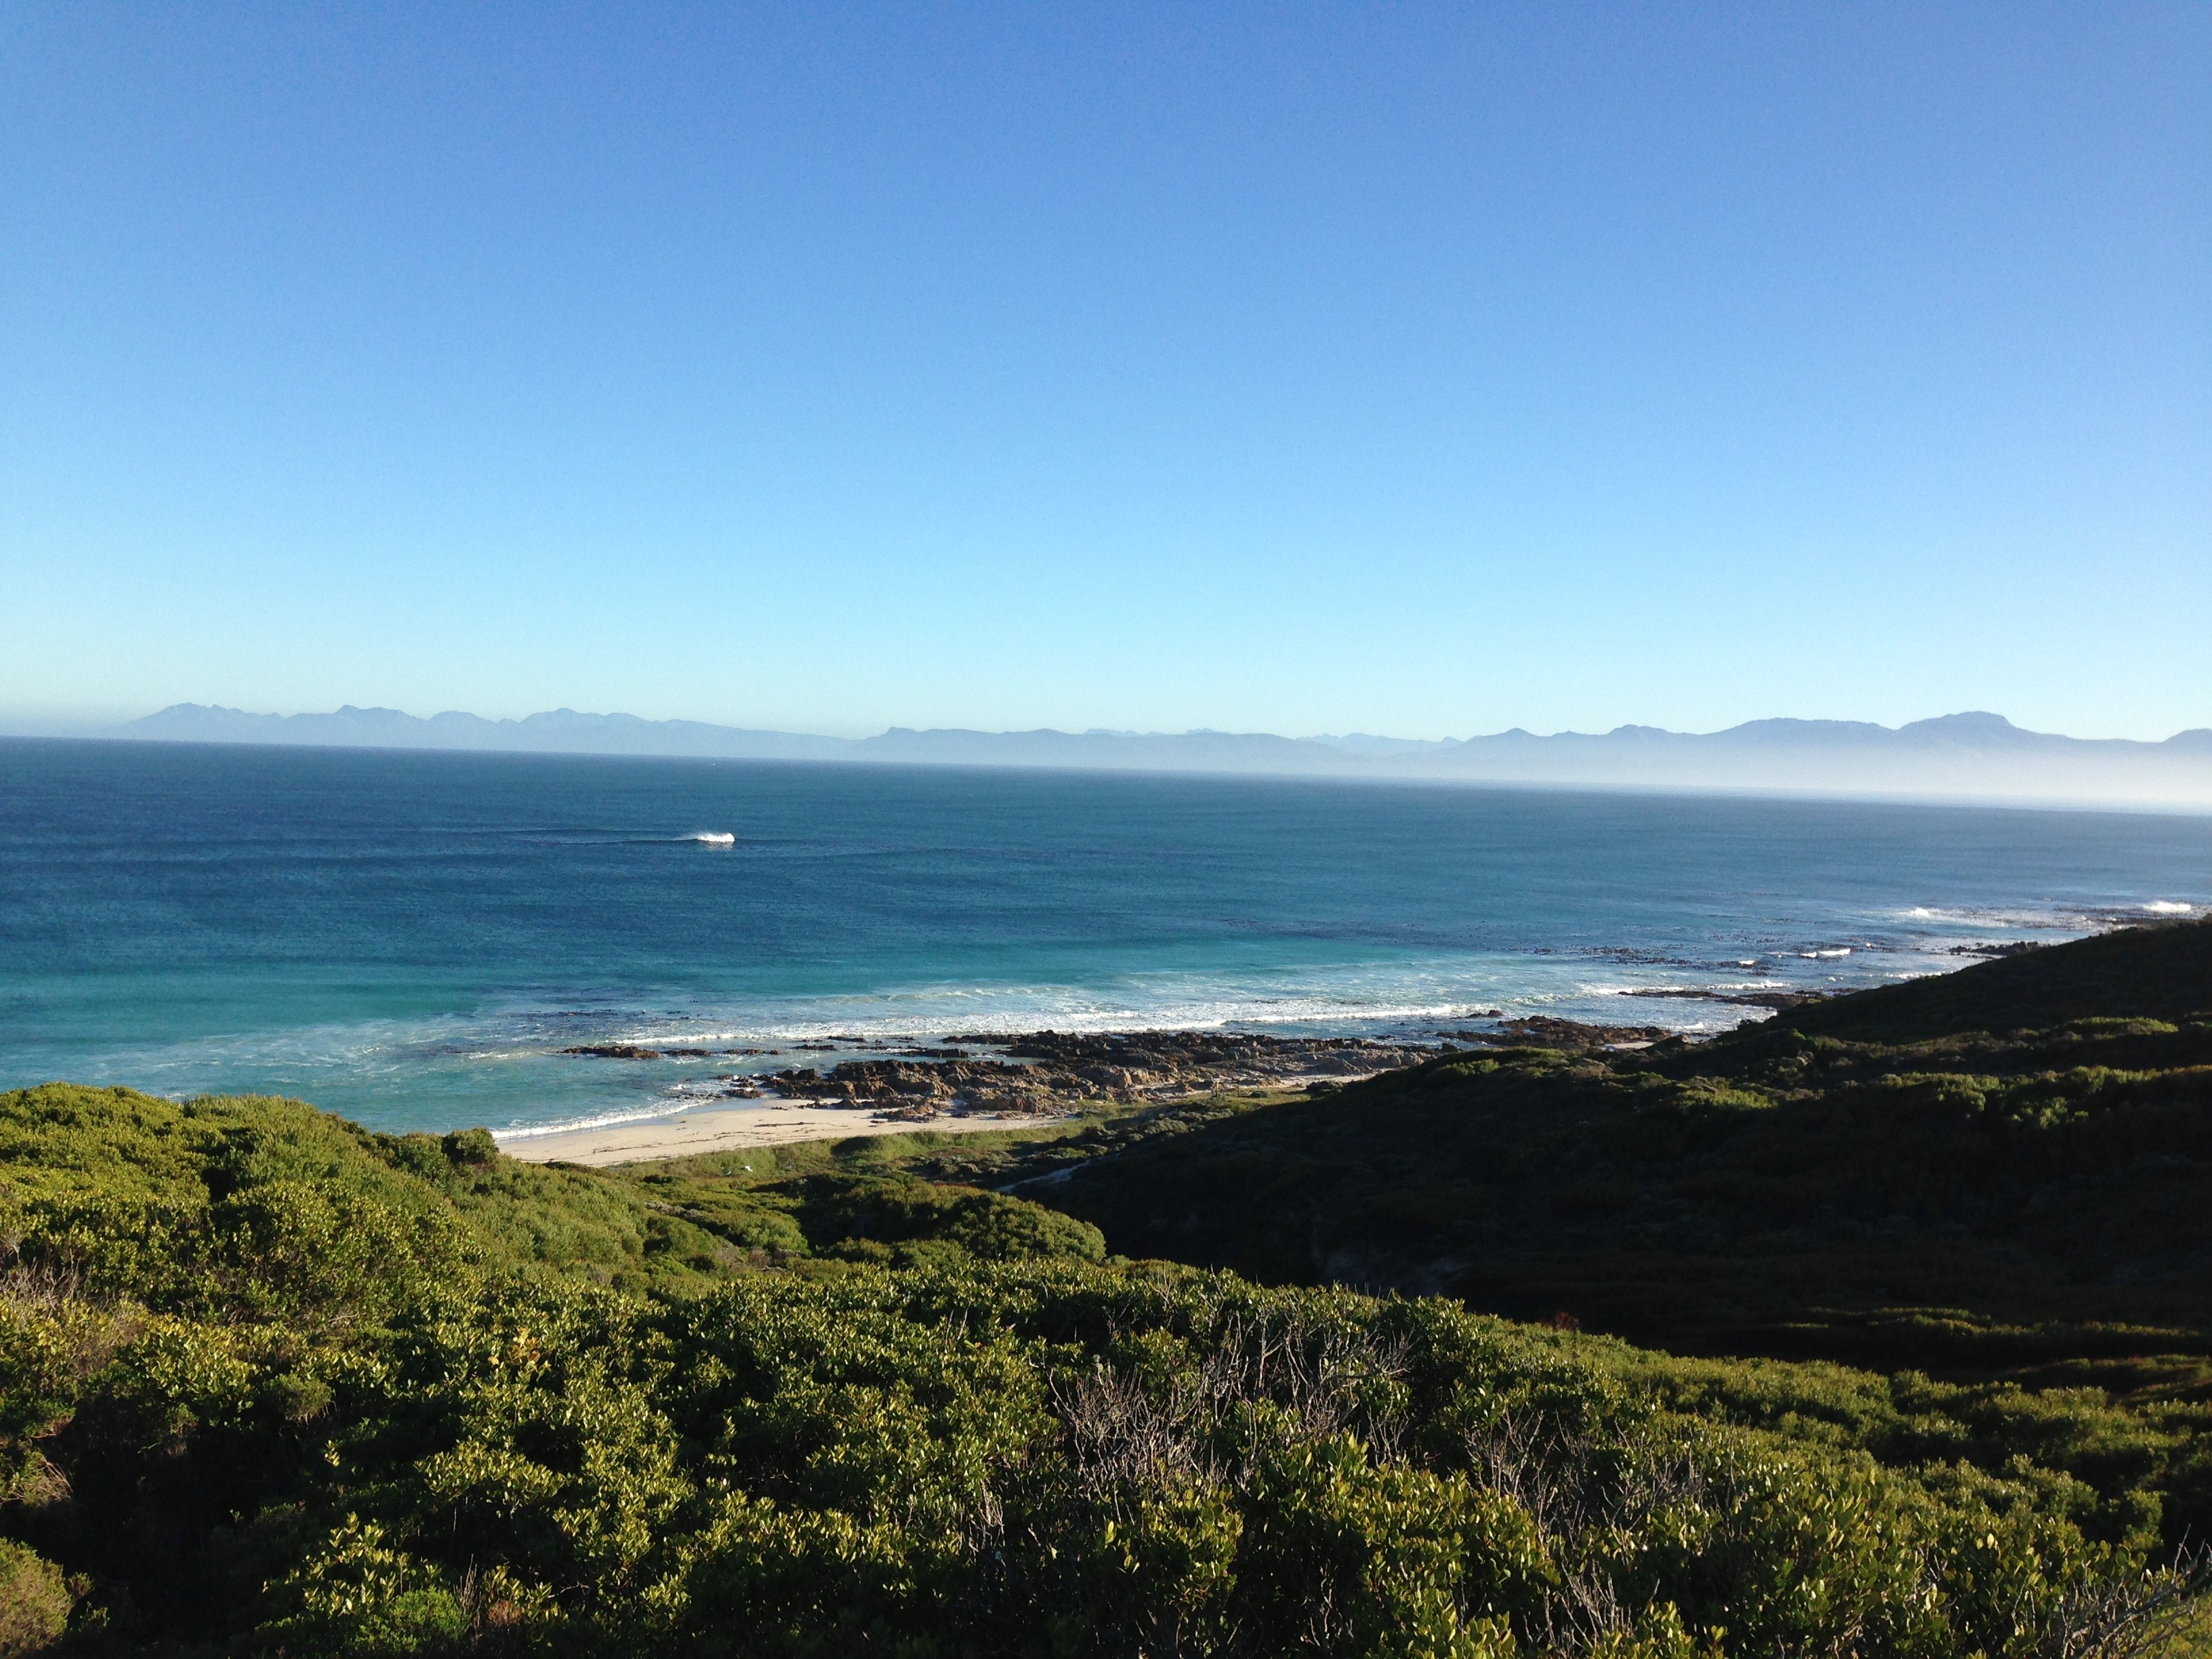 Amazing views of the ocean on one of the plots at Romansbaai